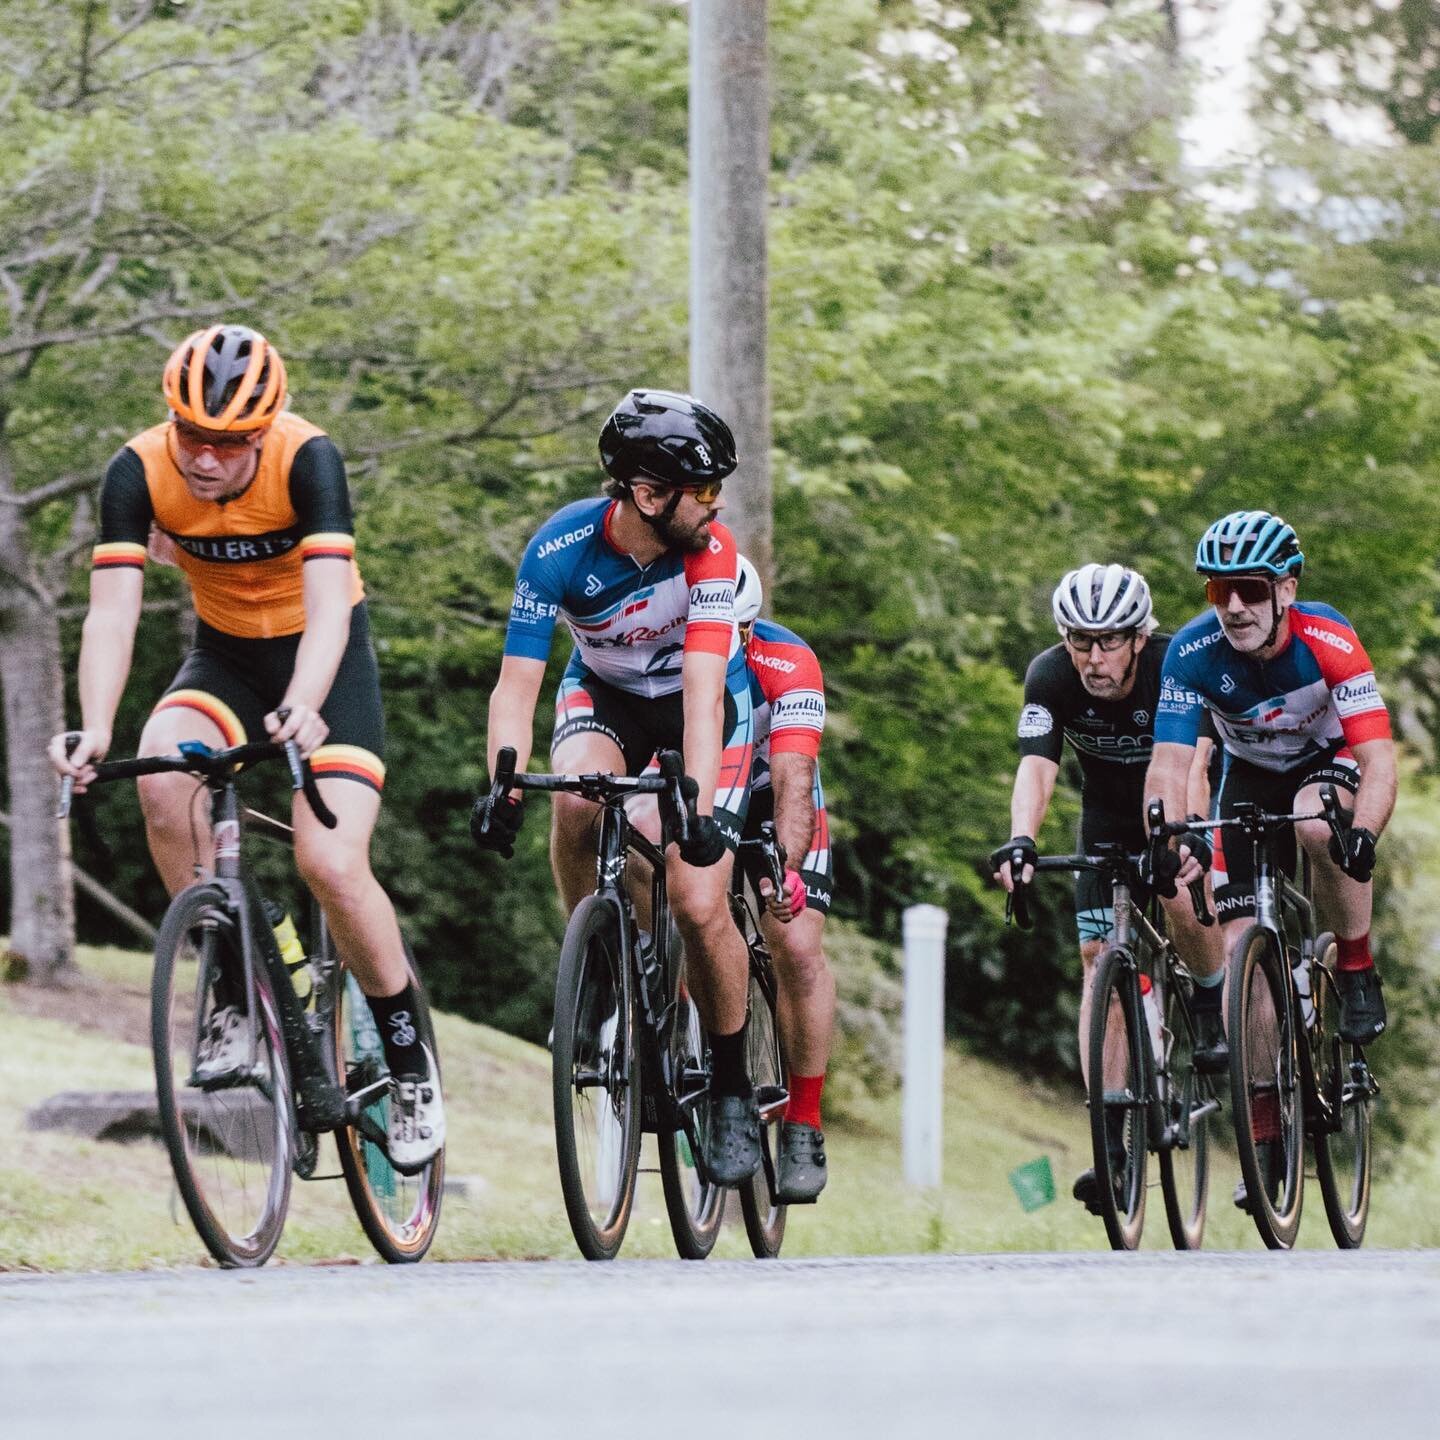 a BIG thank you to @truemarmalade for capturing our team and friends in action at the first night of the summer crit series &lsquo;23! #LCR #LCRSCS #lowcountryracing #ridebikeschs #pizzawatts #dalspizza #hellmanfinancial #parkerlandsurveying #USAC #u